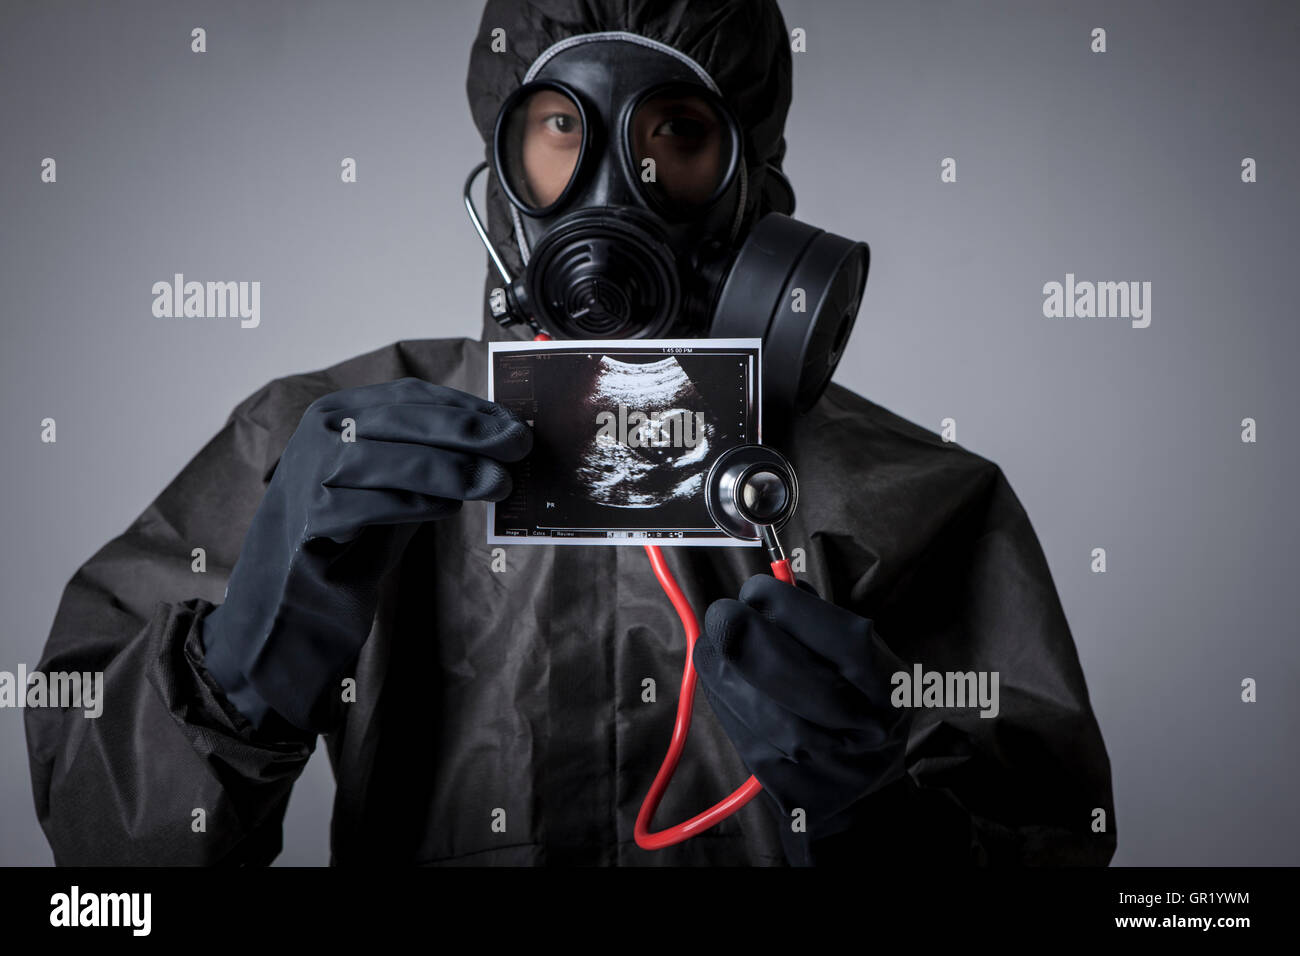 Portrait of man wearing gas mask and black clothes holding a sonogram Stock Photo